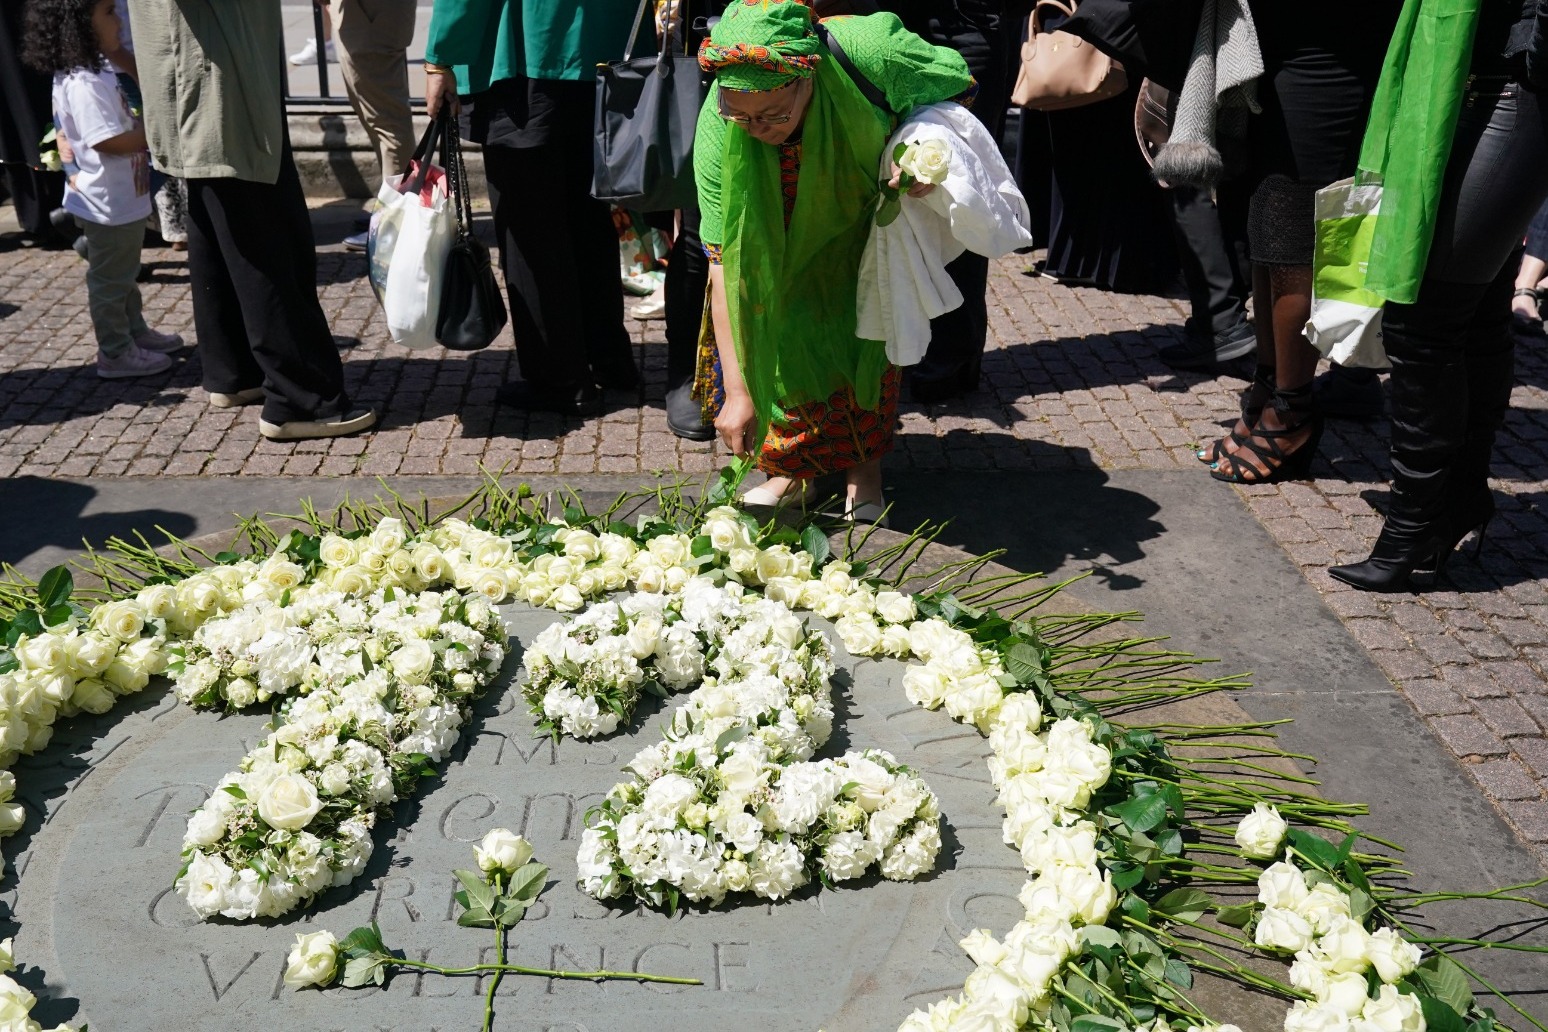 Names of 72 Grenfell victims read out at memorial service on fifth anniversary 